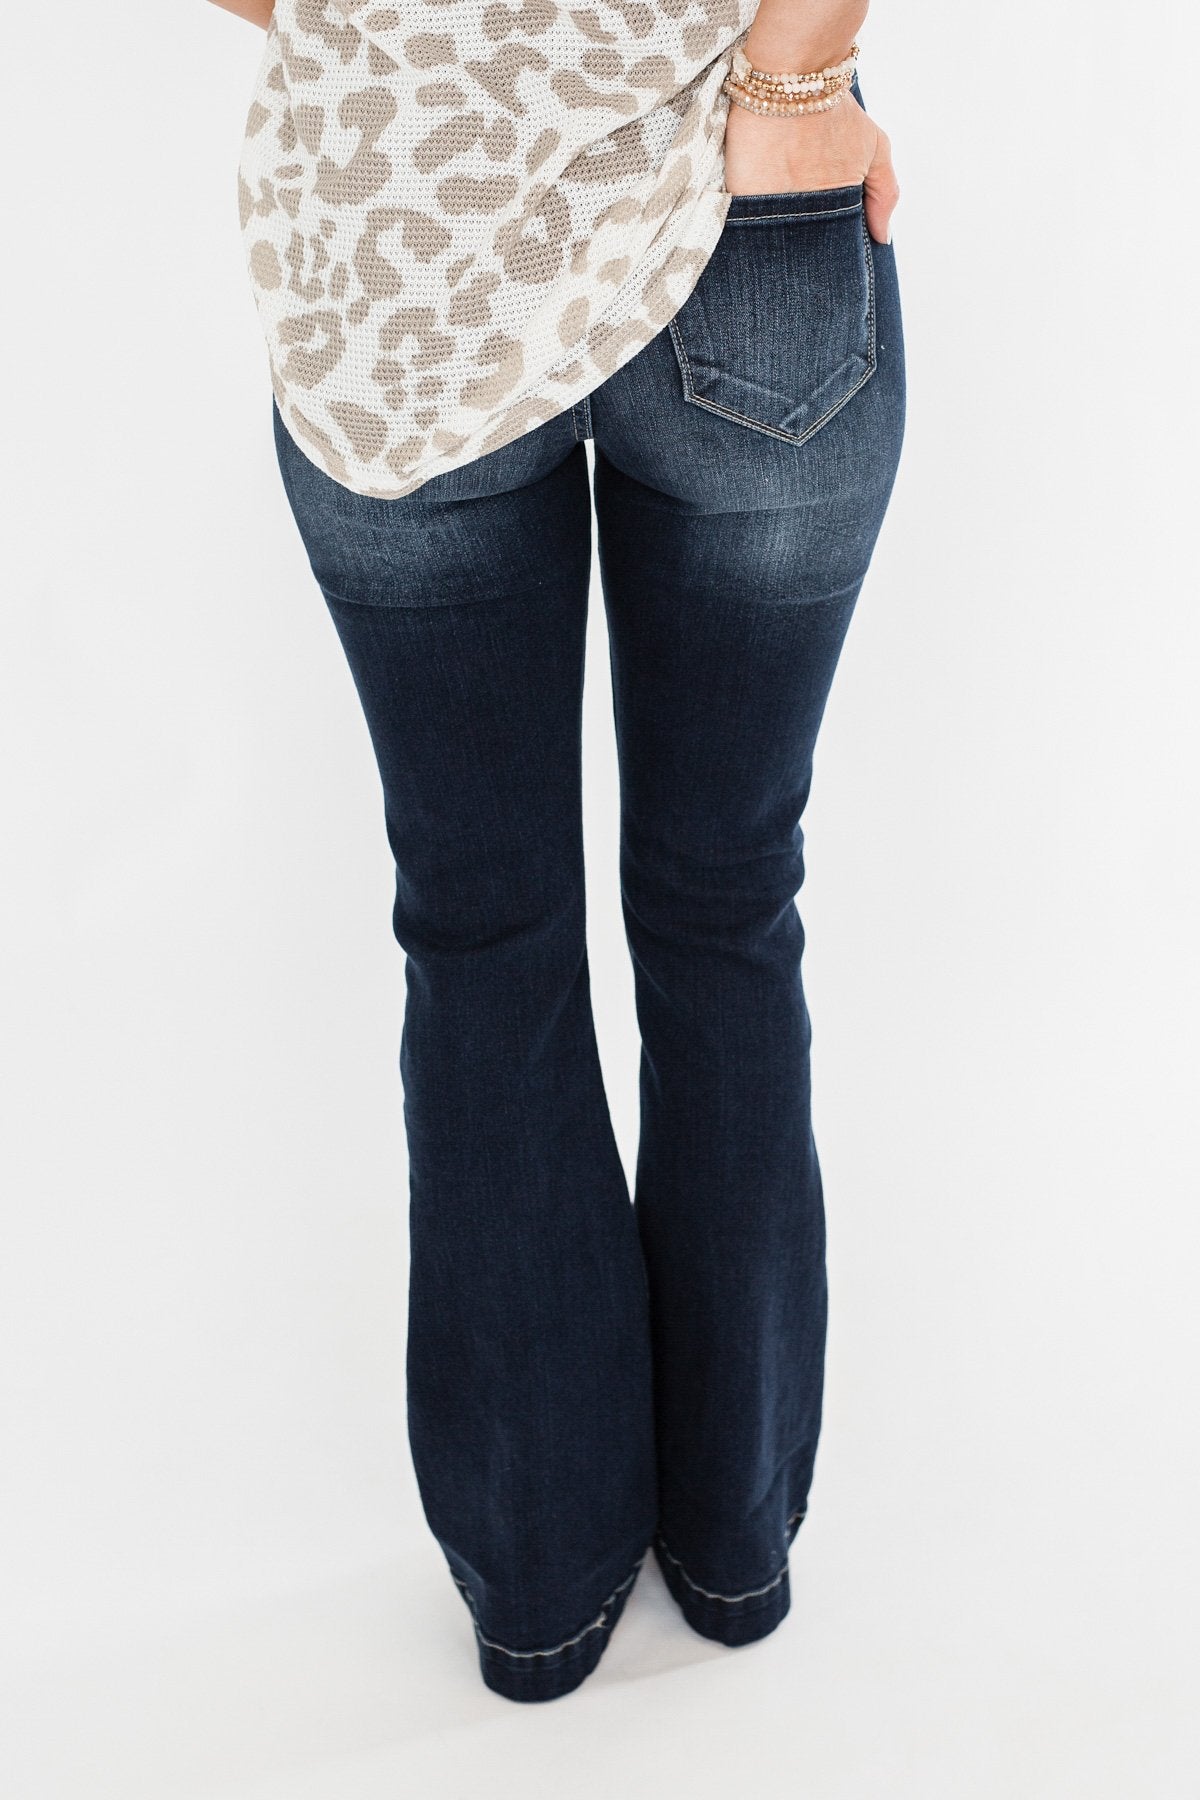 KanCan Button Fly Flare Jeans- Diane Wash